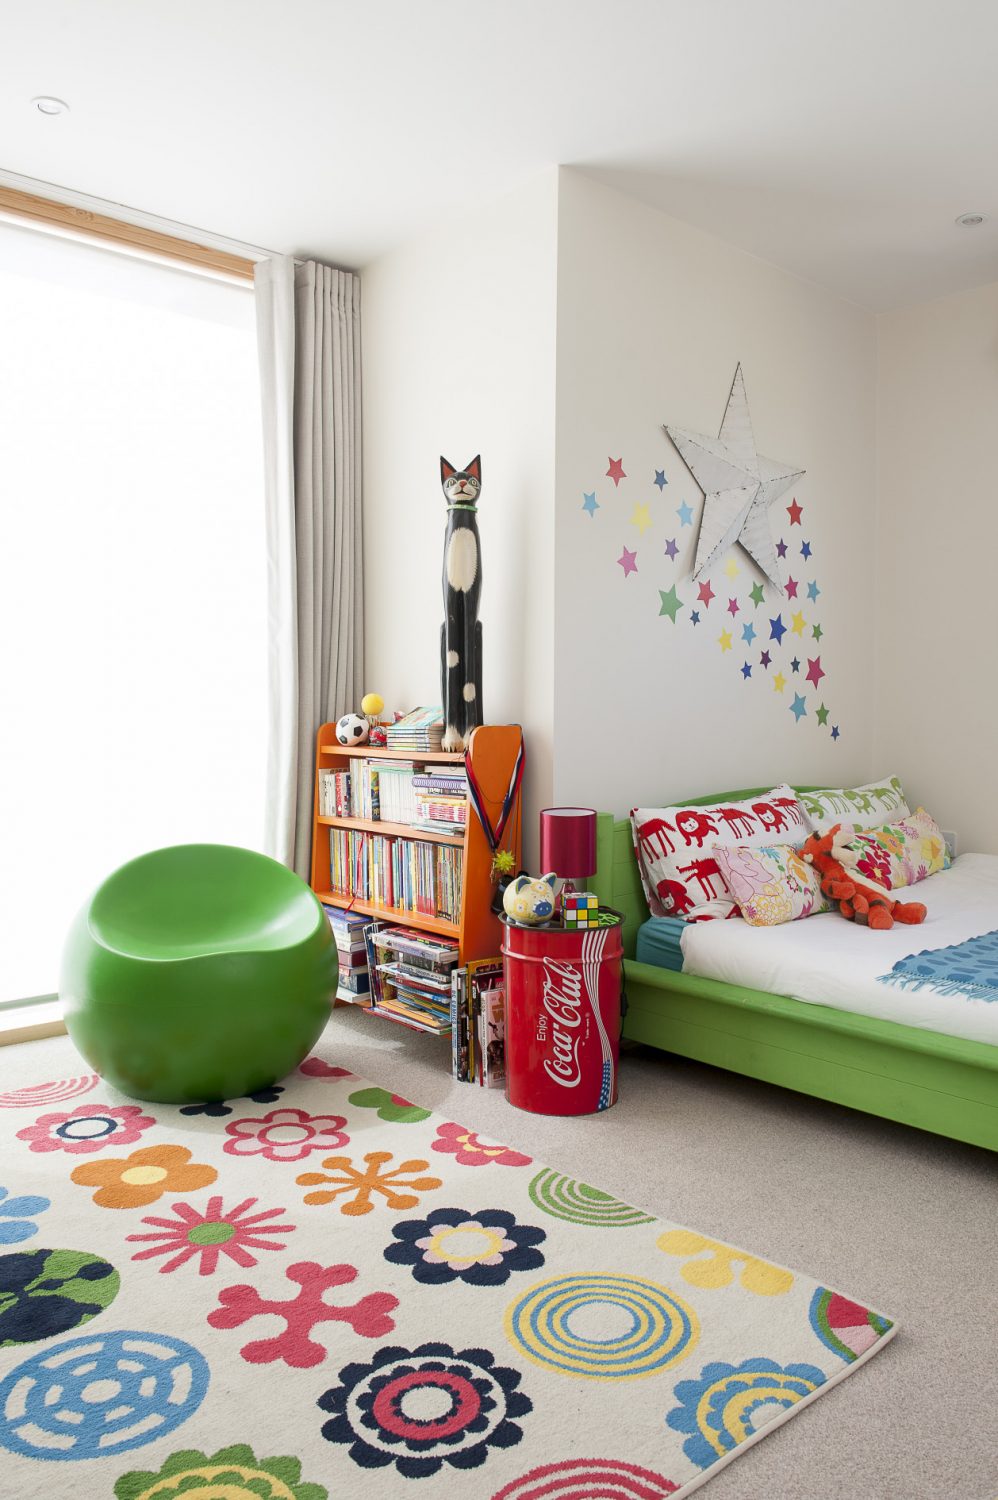 In Jasper’s colourfully accessorised room, Jenny has taken an Ikea pine bed and, with the help of Annie Sloan, turned it lime green to match the 60s ball chair. Beside the bed is a Coca Cola drum table and above it a crowd of multi-coloured stars...